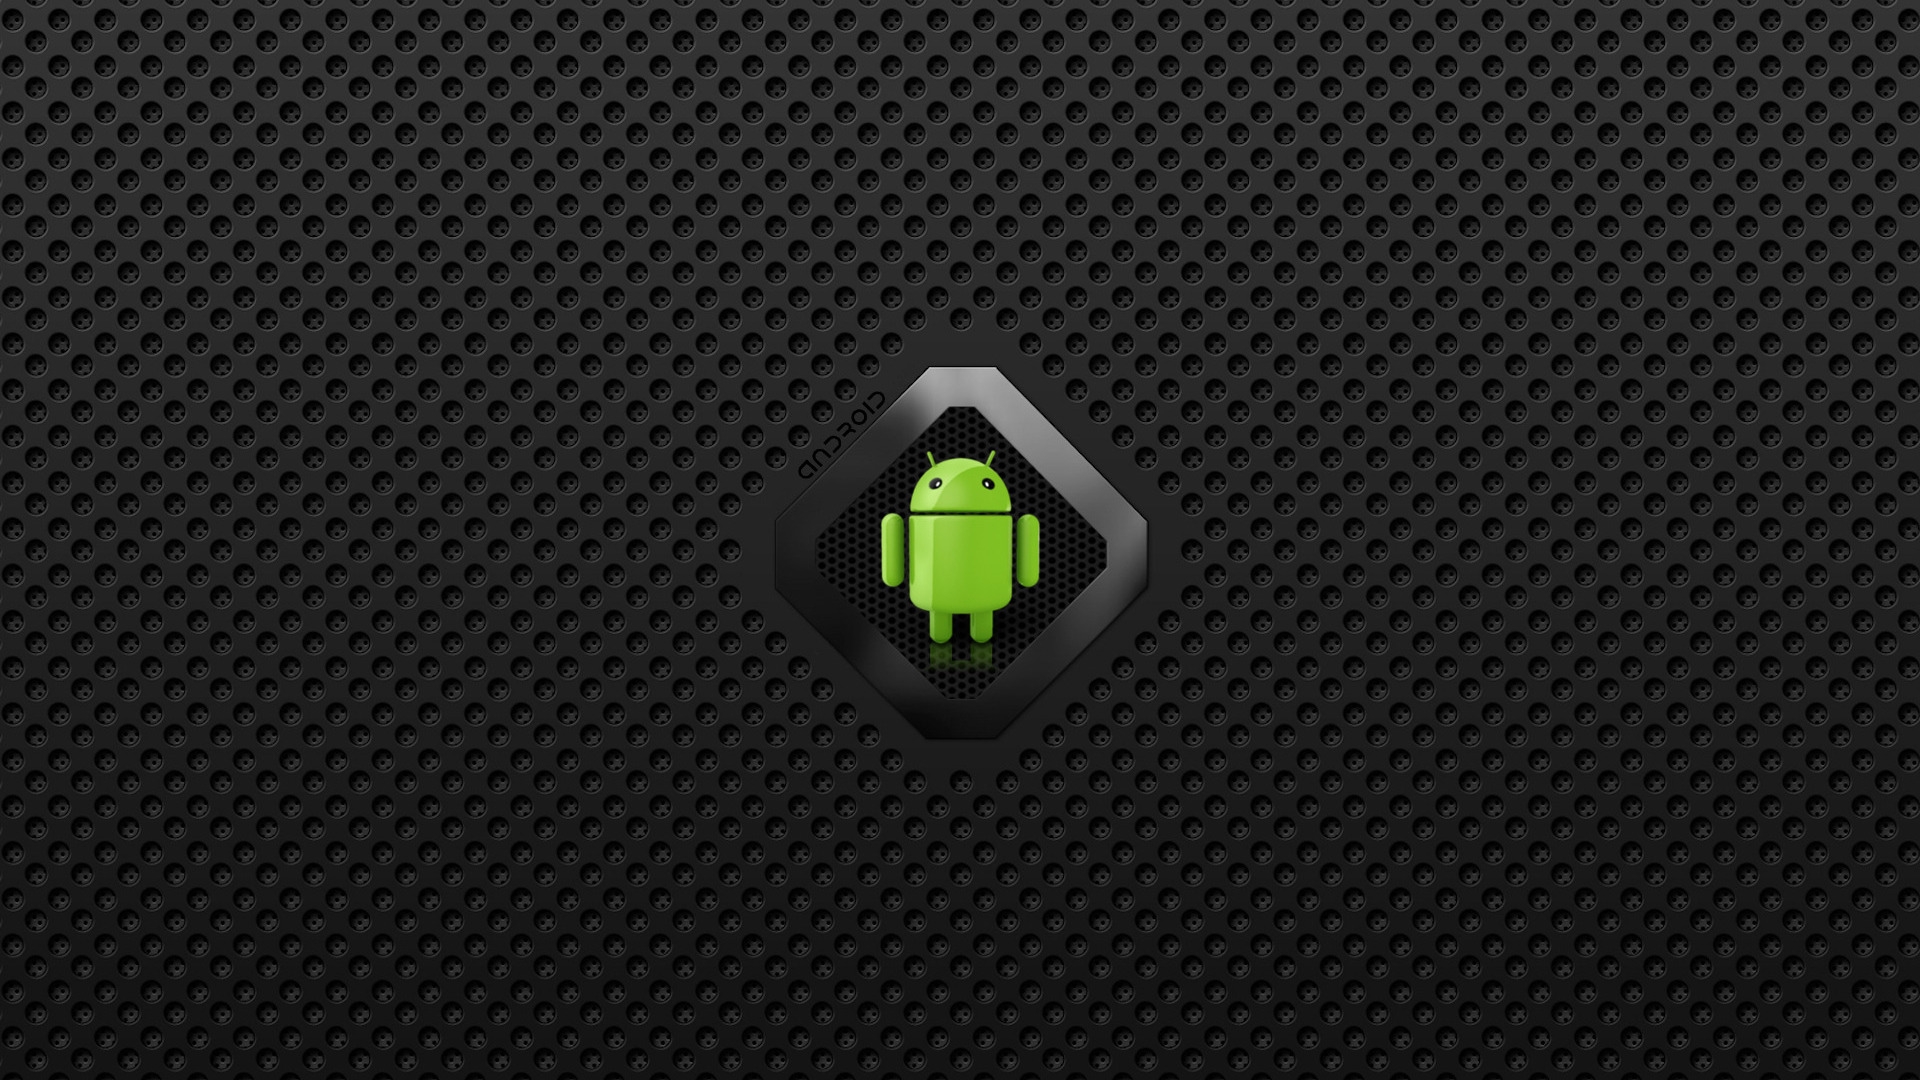 androidデスクトップ壁紙,黒,緑,フォント,グラフィックス,パターン